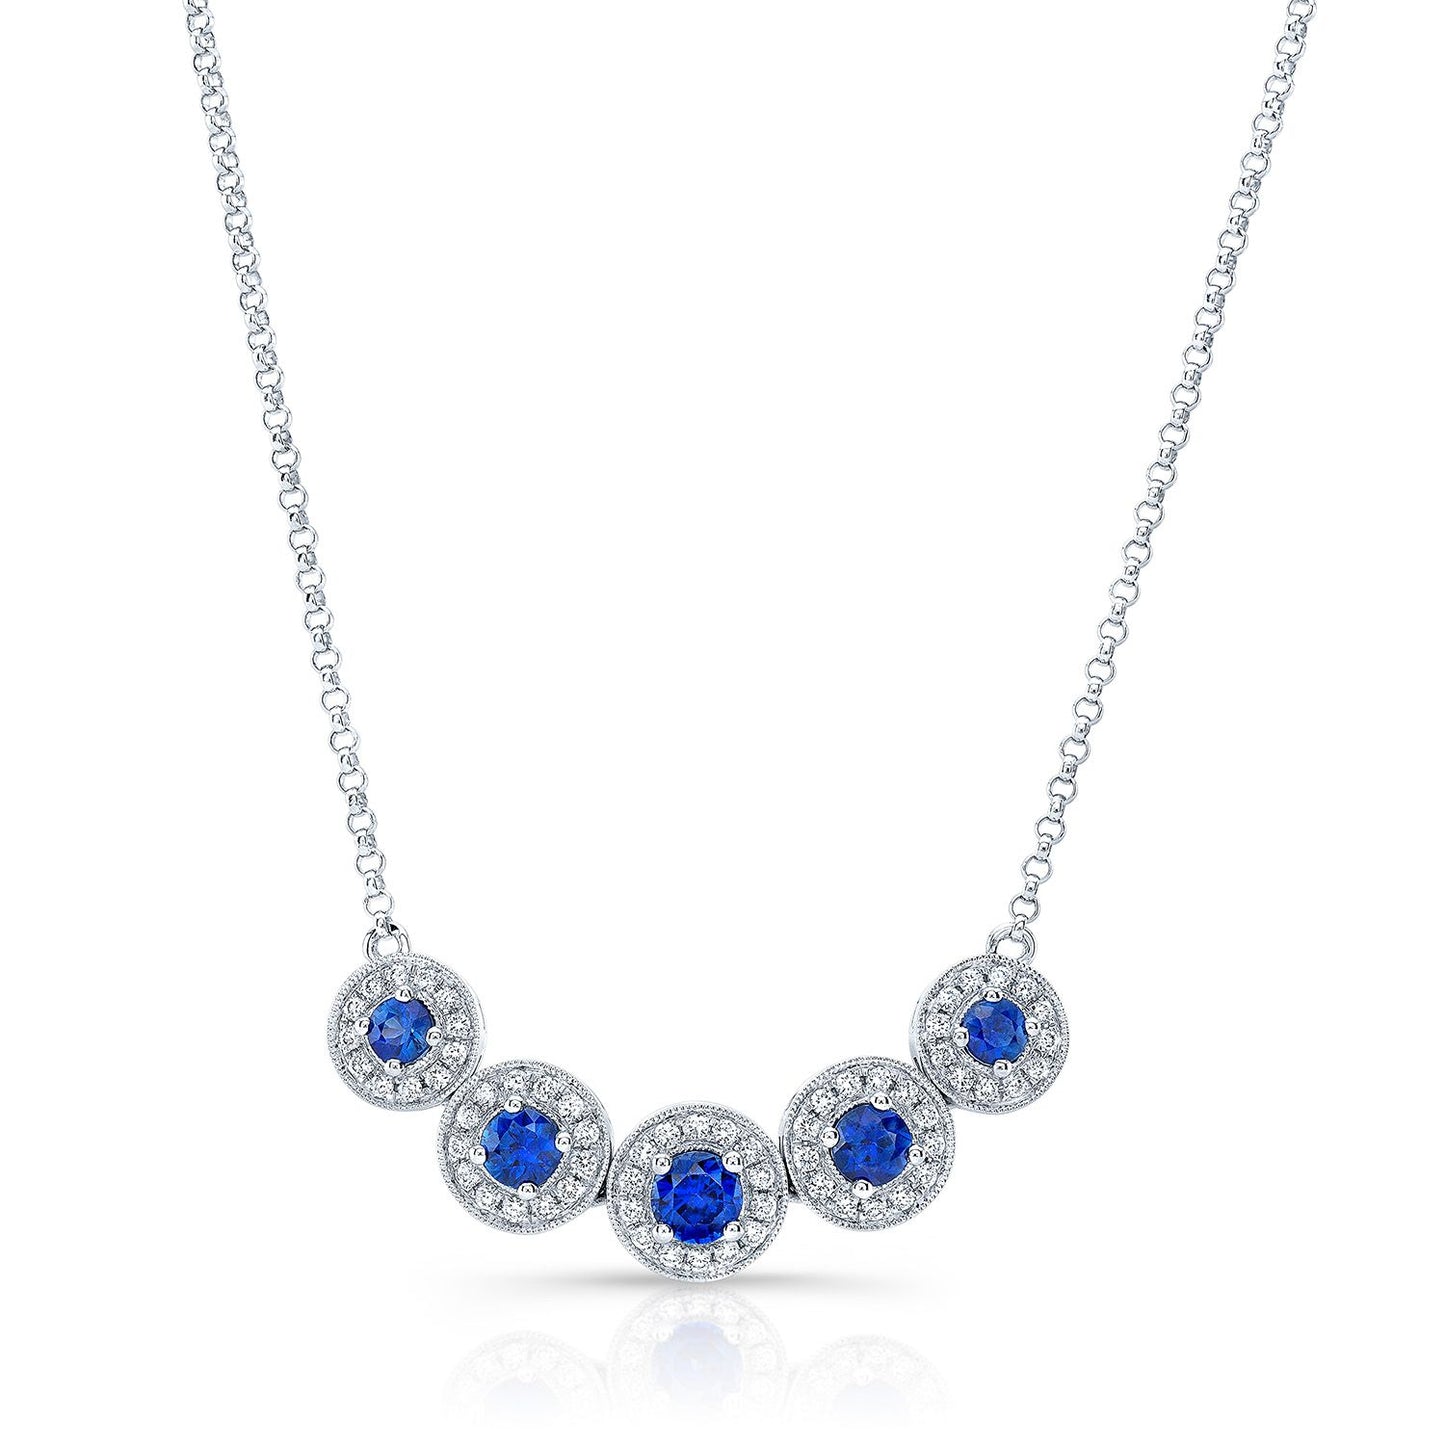 Sapphire And Diamond Graduated Curved Necklace In 14k White Gold